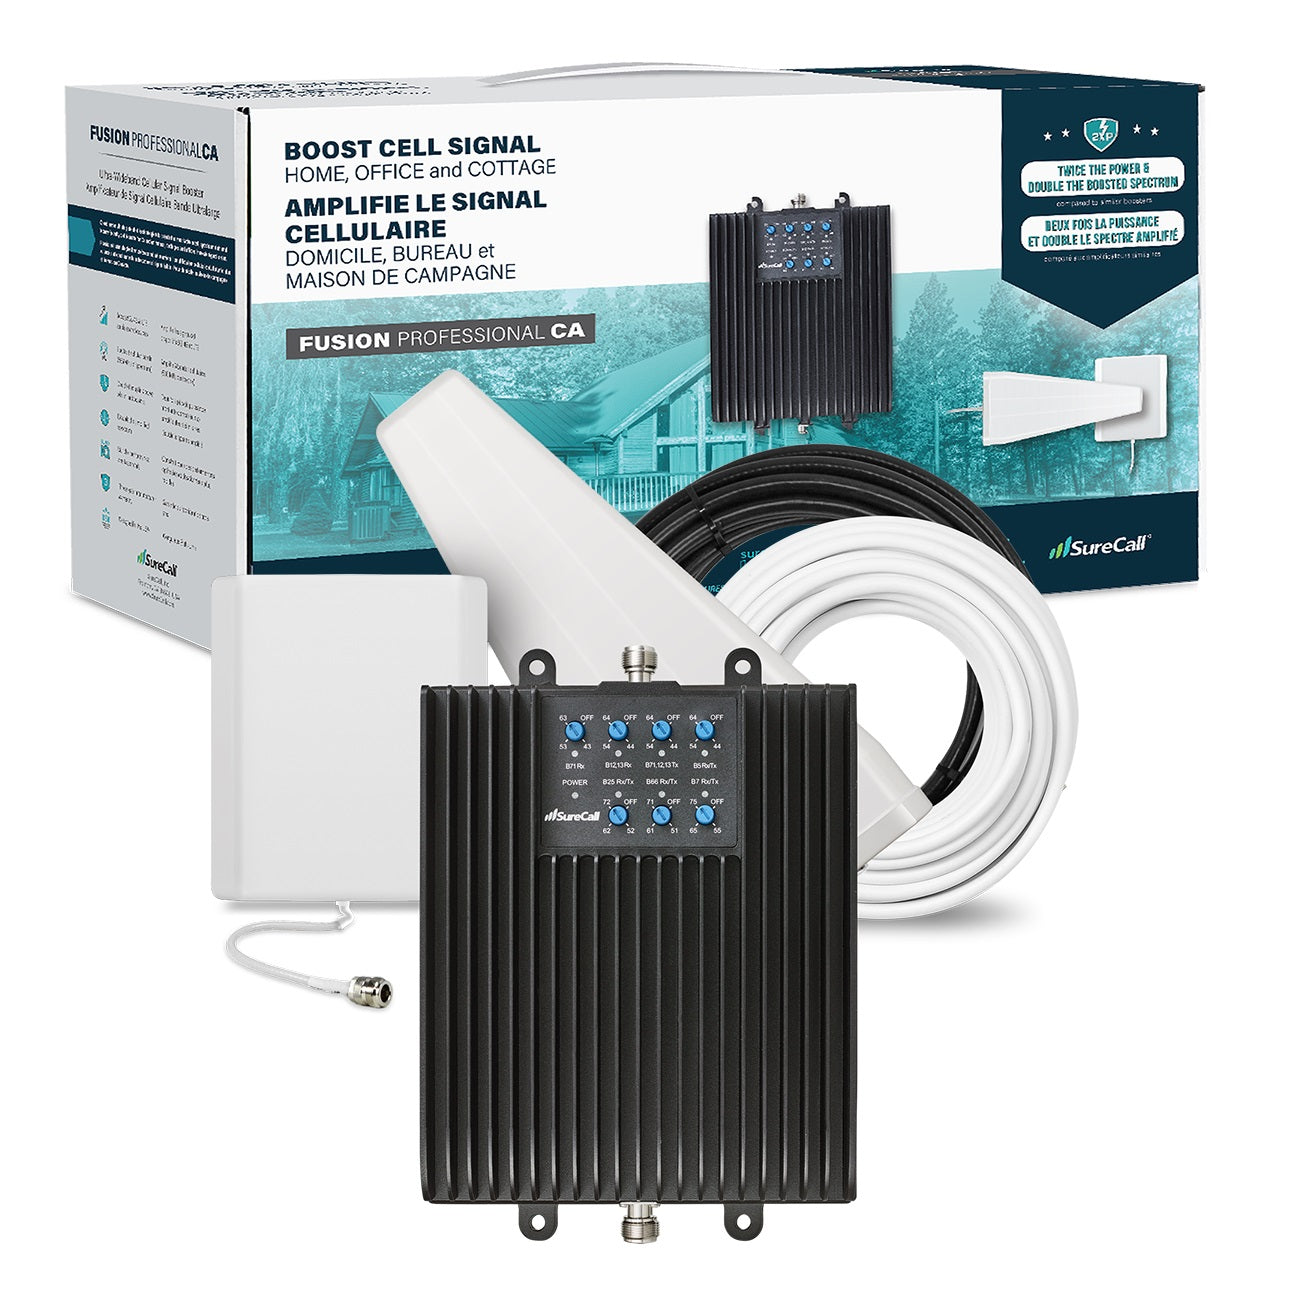 SureCall Fusion Professional 2.0 Cell Phone Signal Booster Kit for Home/Office | Up to 17000 sq ft | All Canadian Carriers 4G/5G - Bell, Rogers, Telus | ISED Approved